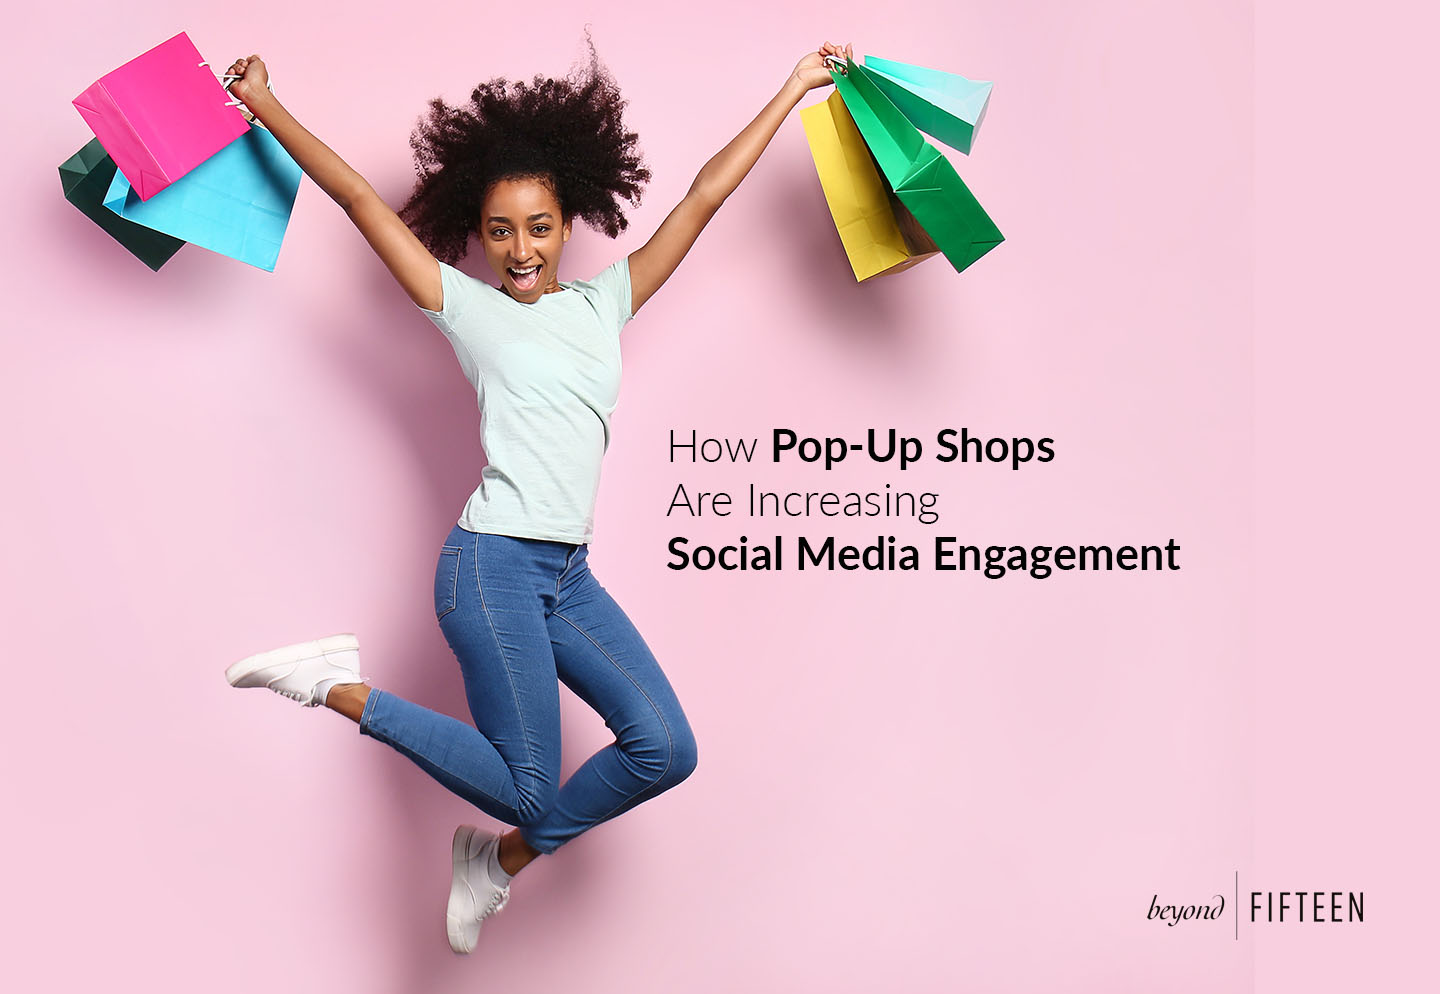 How Pop-Up Shops Are Increasing Social Media Engagement